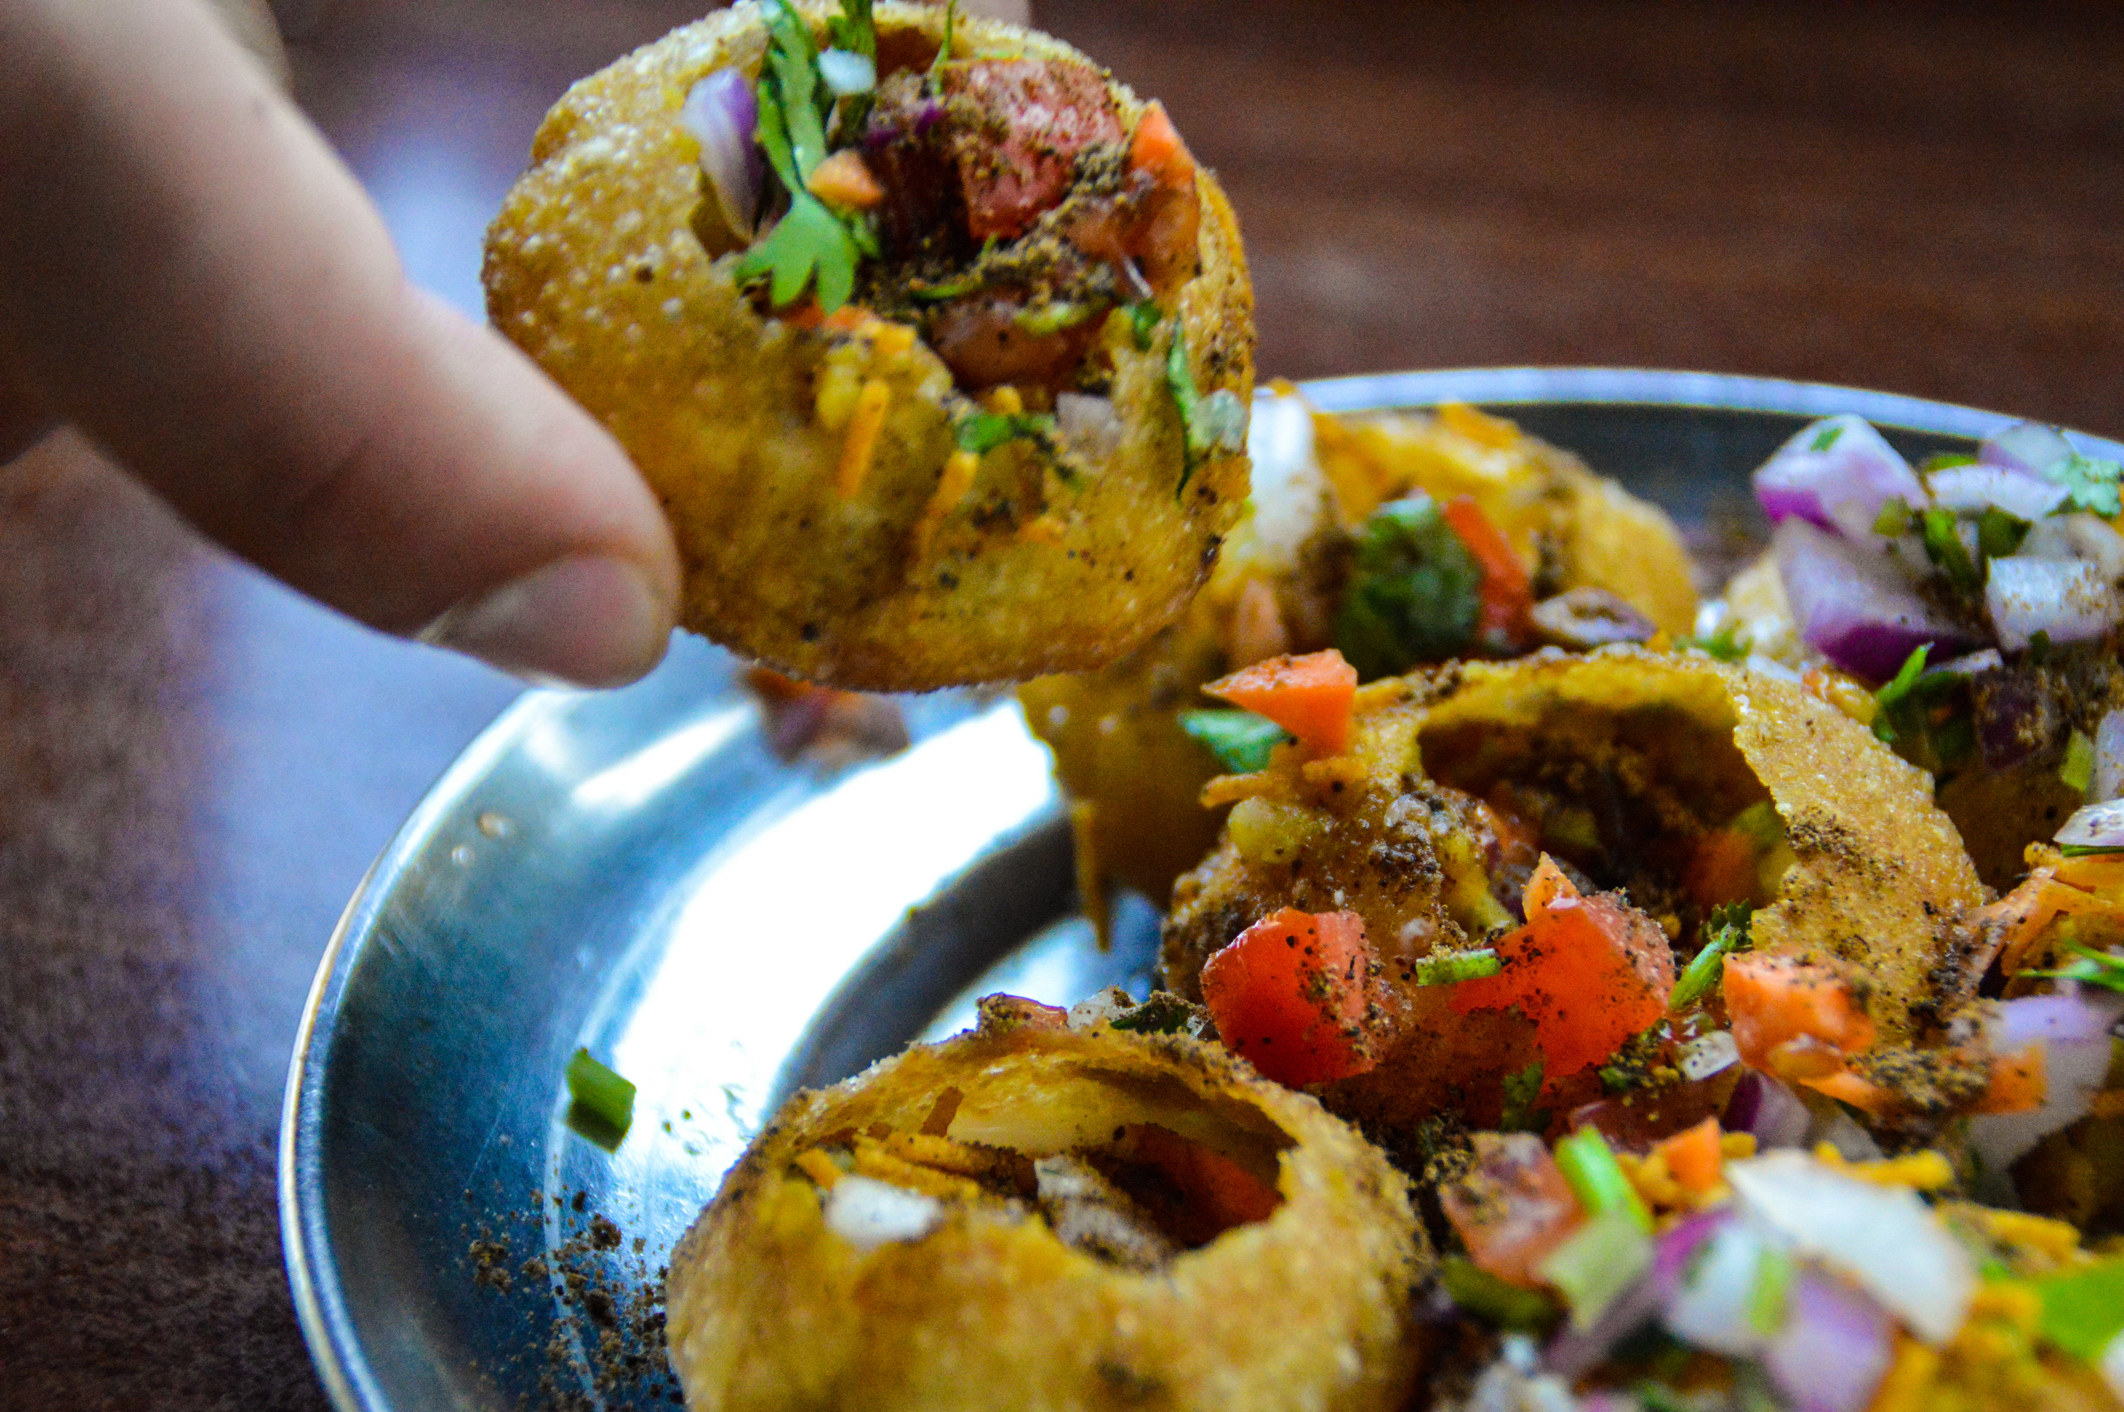 A hand grabbing pani puri from a plate.